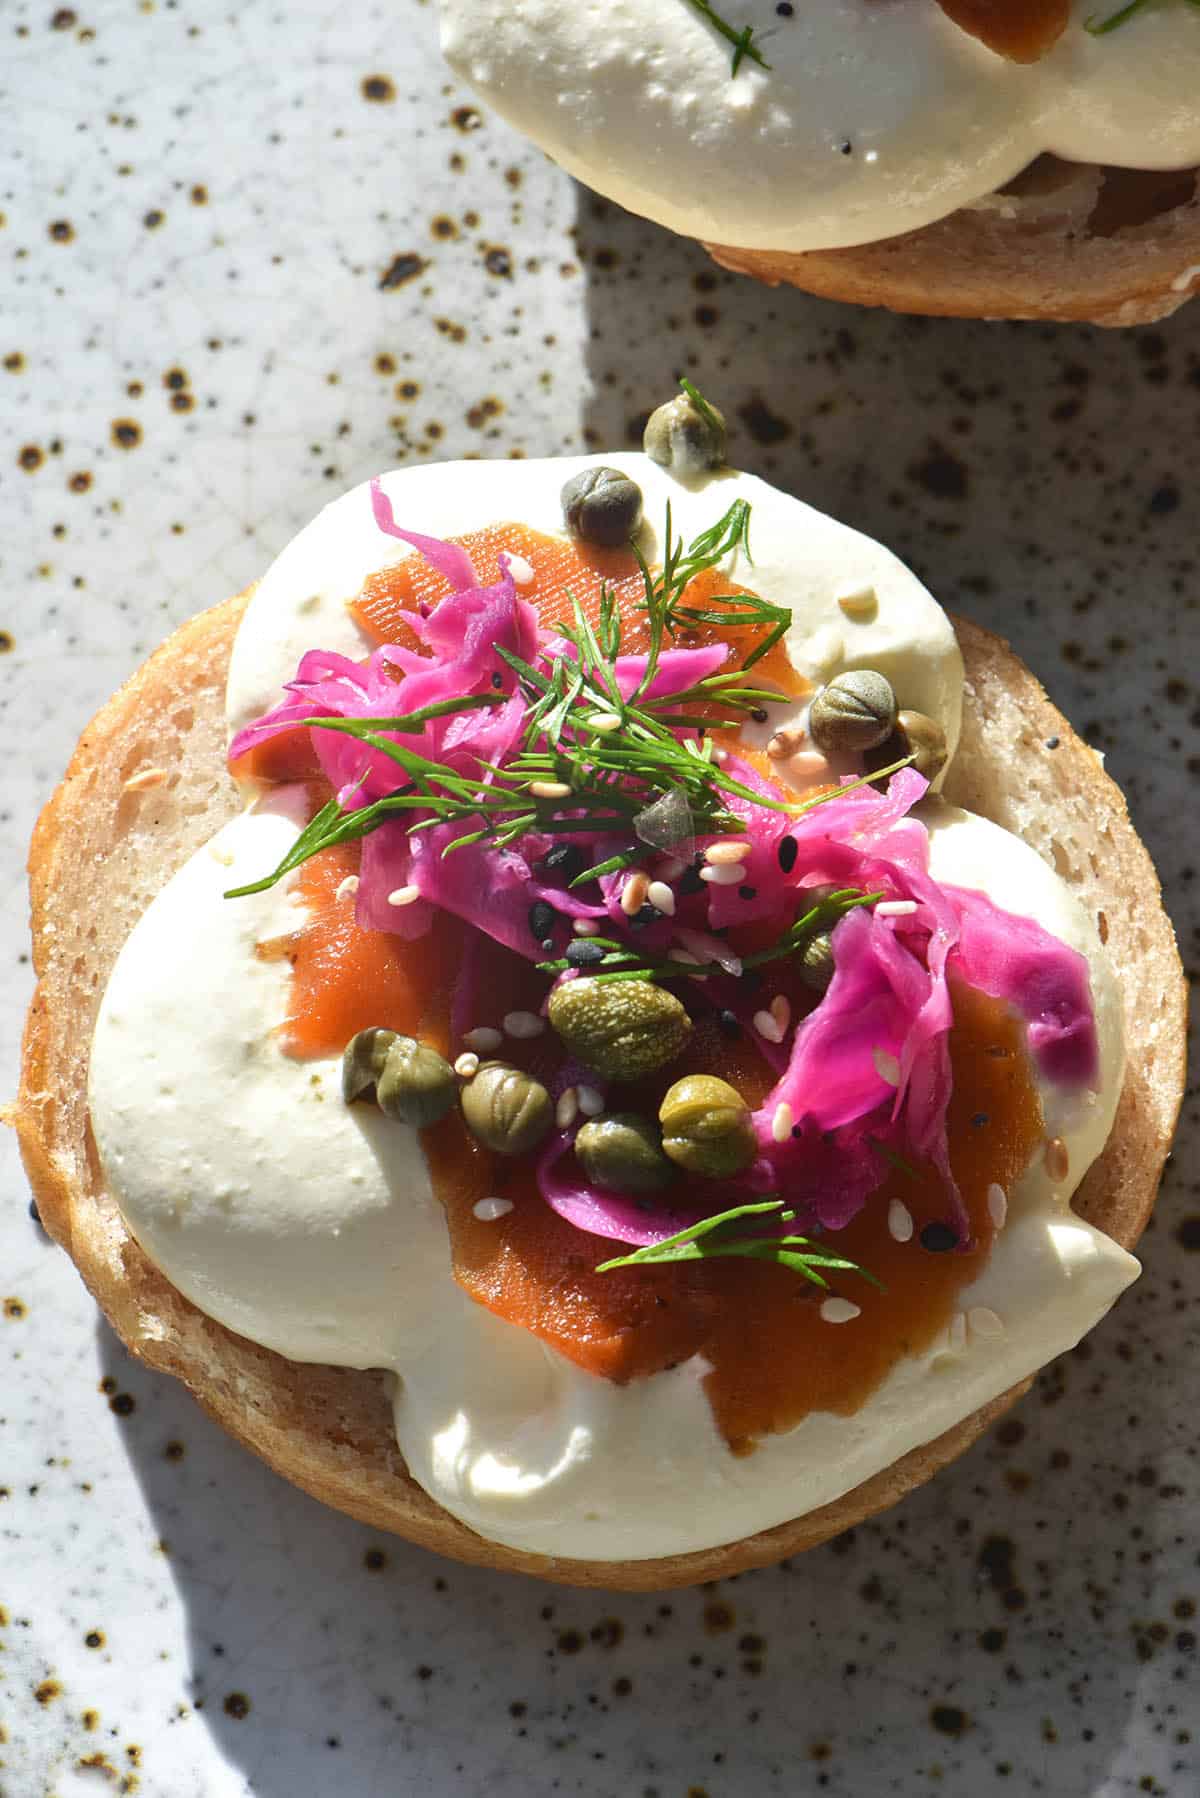 an aerial view of a gluten free bagel half topped with FODMAP friendly 'pickled onion, easy carrot lox, capers and whipped ricotta. The bagel sits atop a white ceramic plate bathed in sunlight.